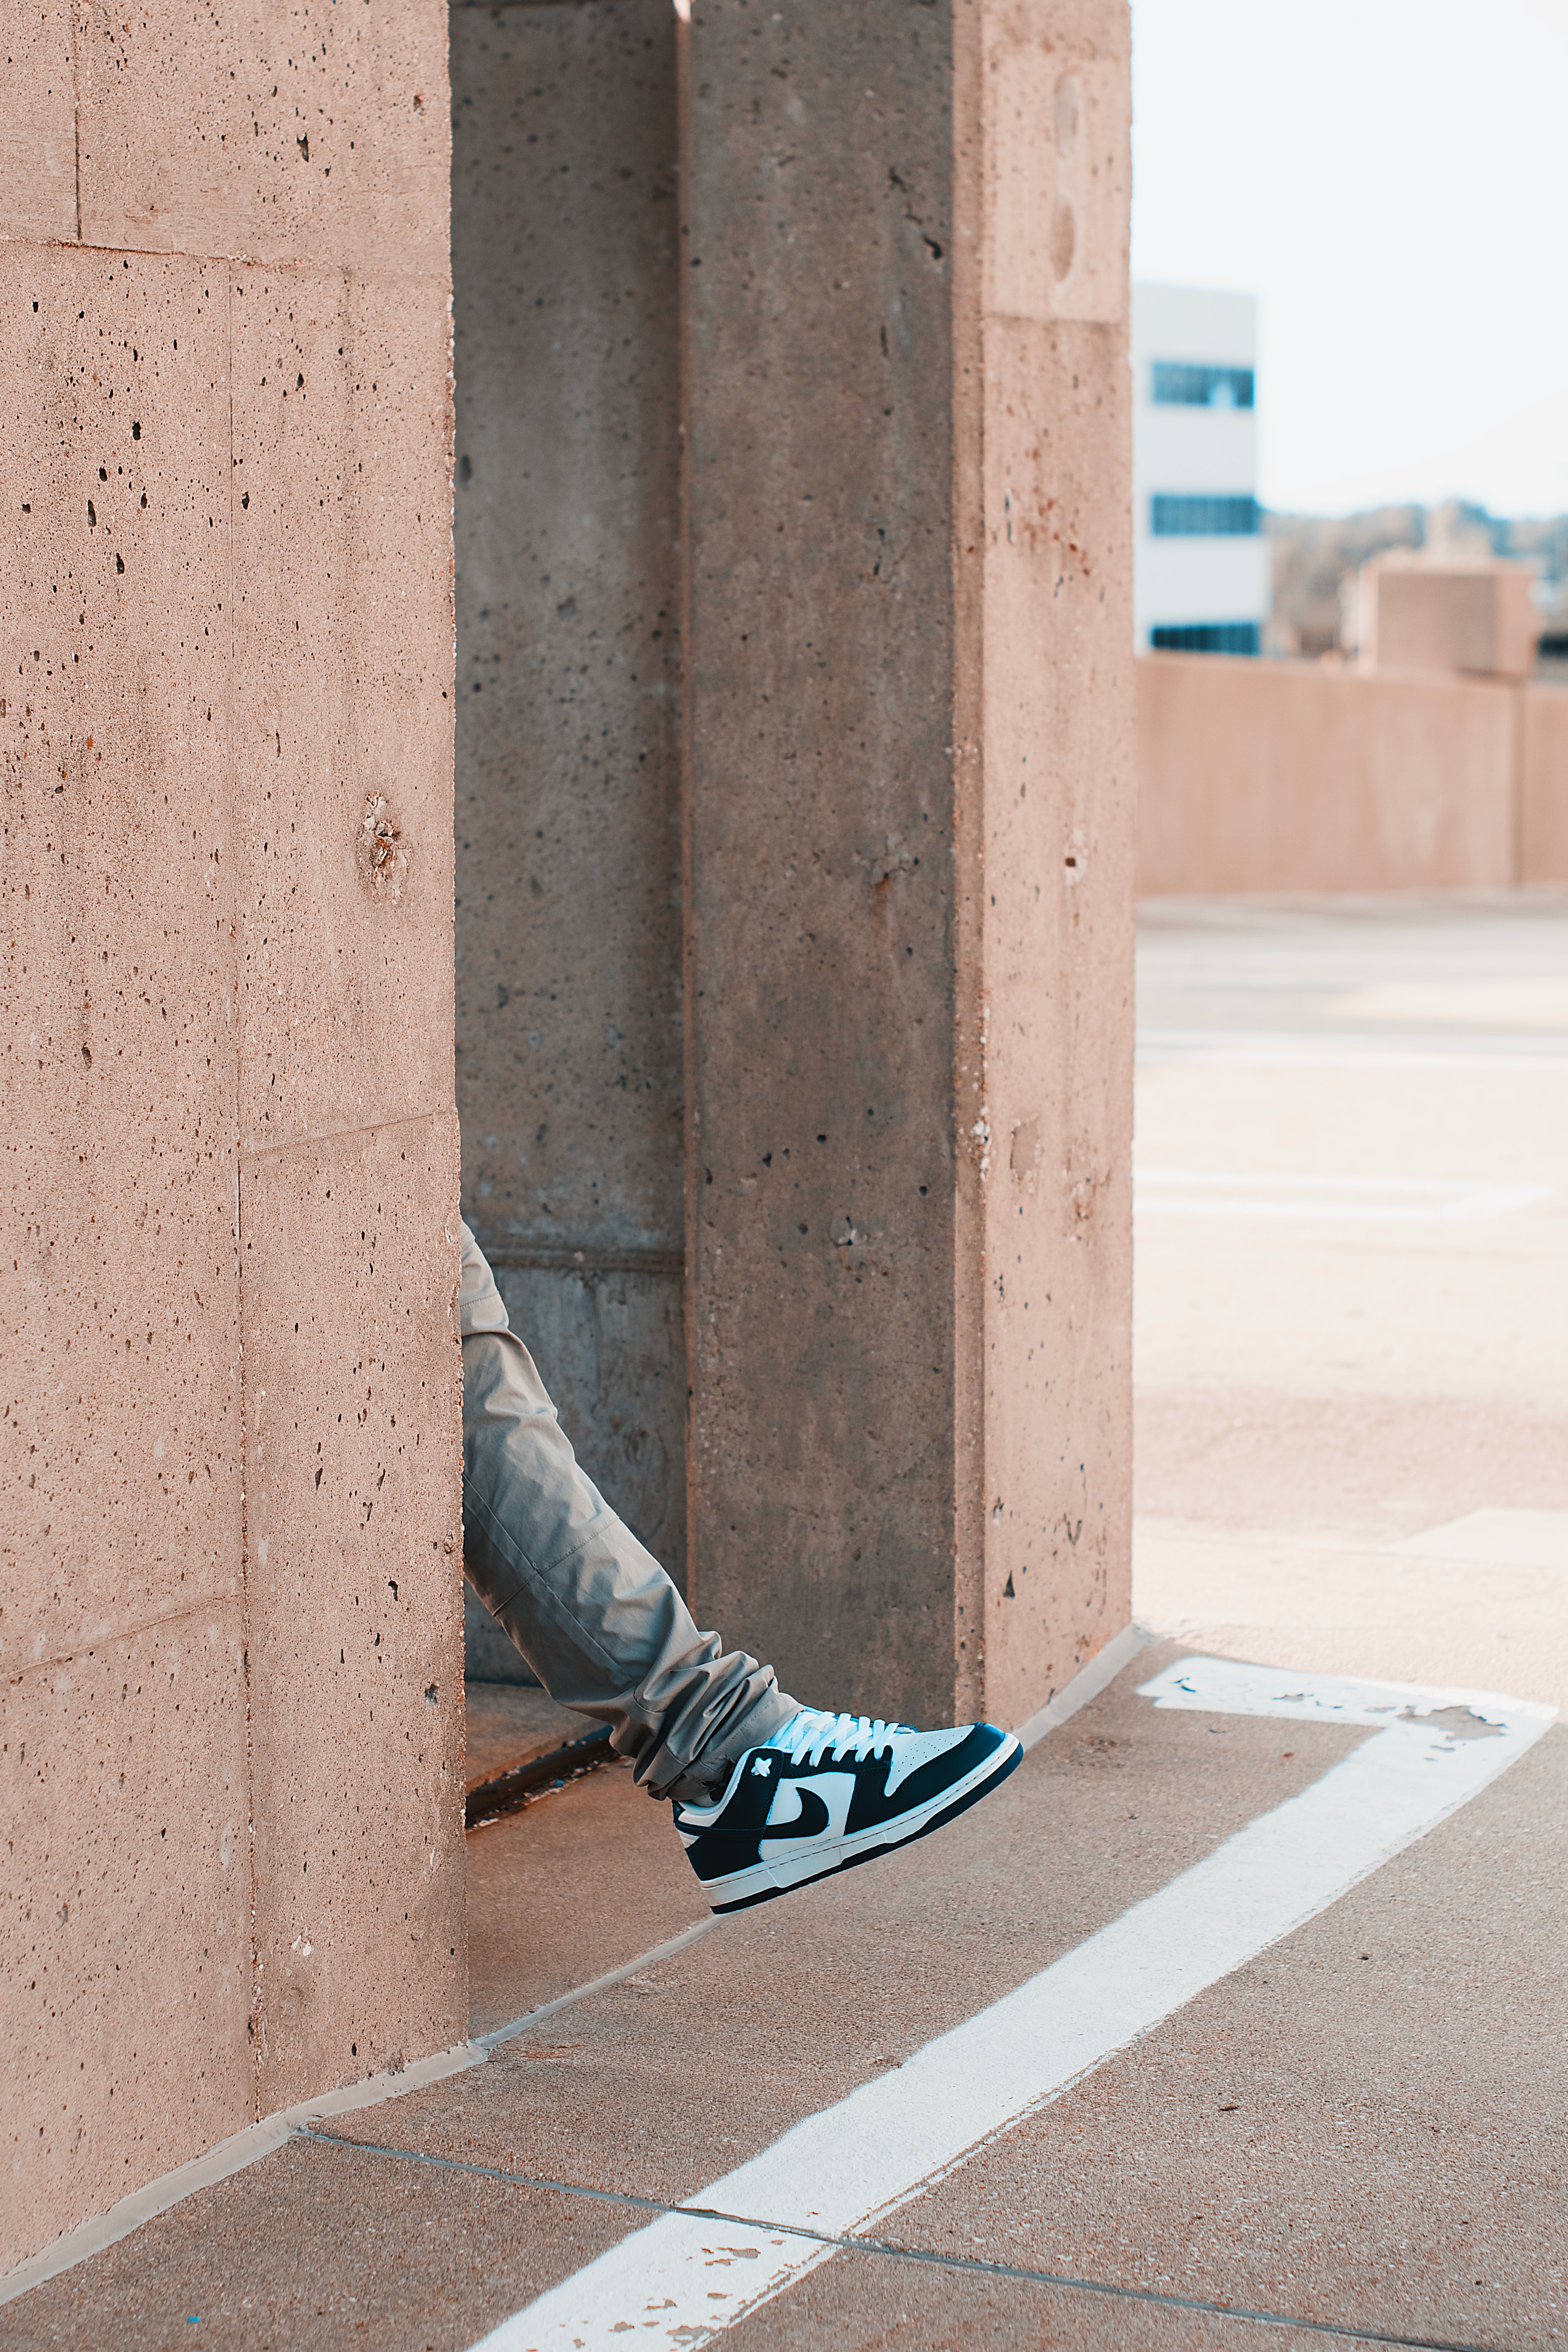 building, miscellanea, miscellaneous, sneakers, wall, leg images